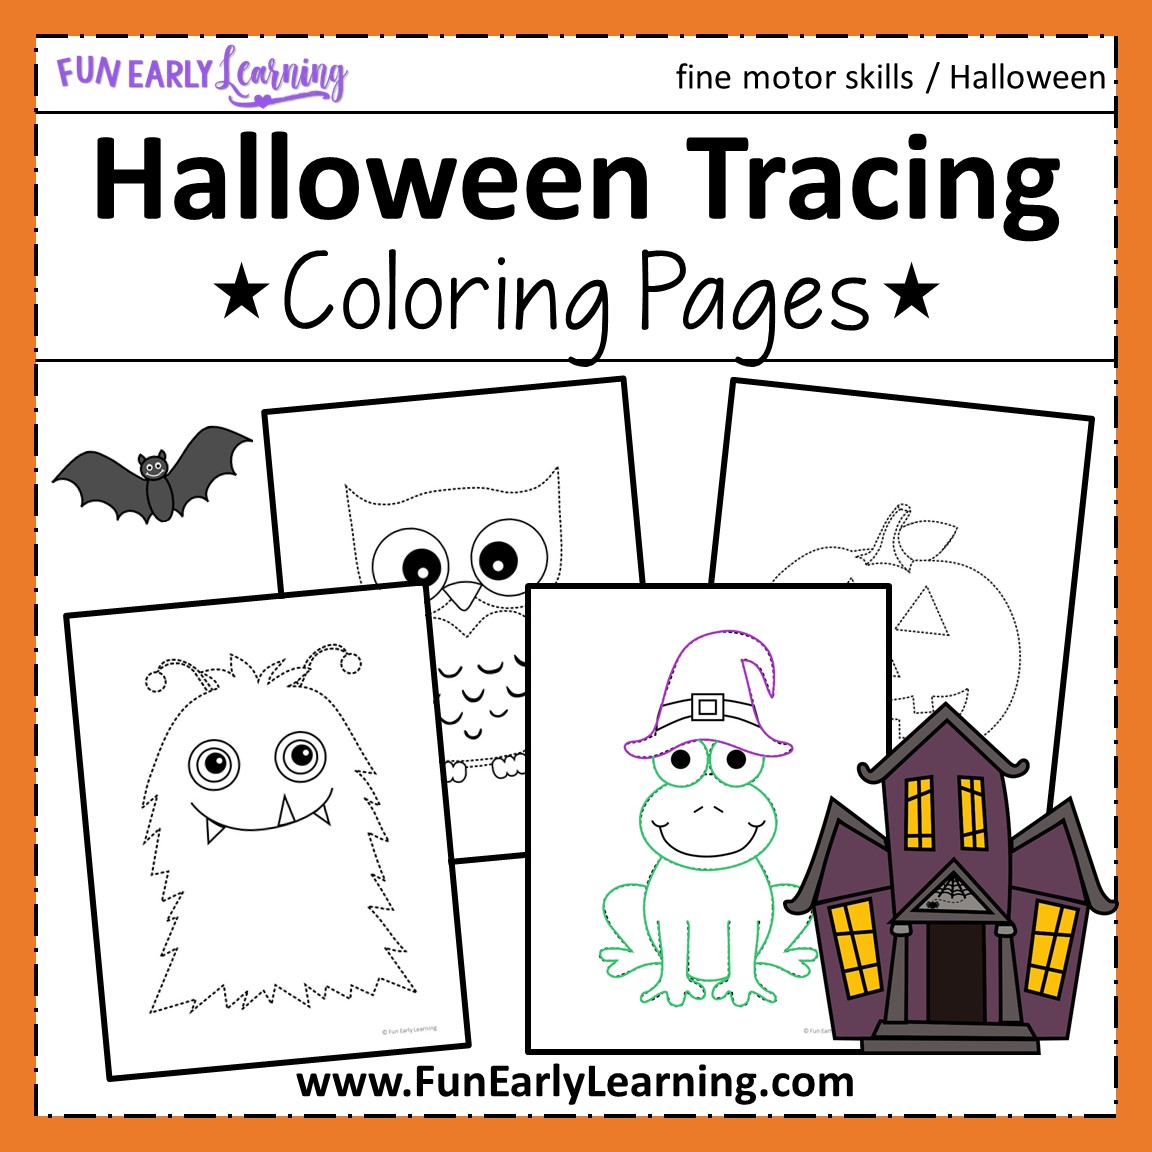 https://www.funearlylearning.com/wp-content/uploads/2020/10/halloween-coloring-pages-printable-free-preview1.jpg